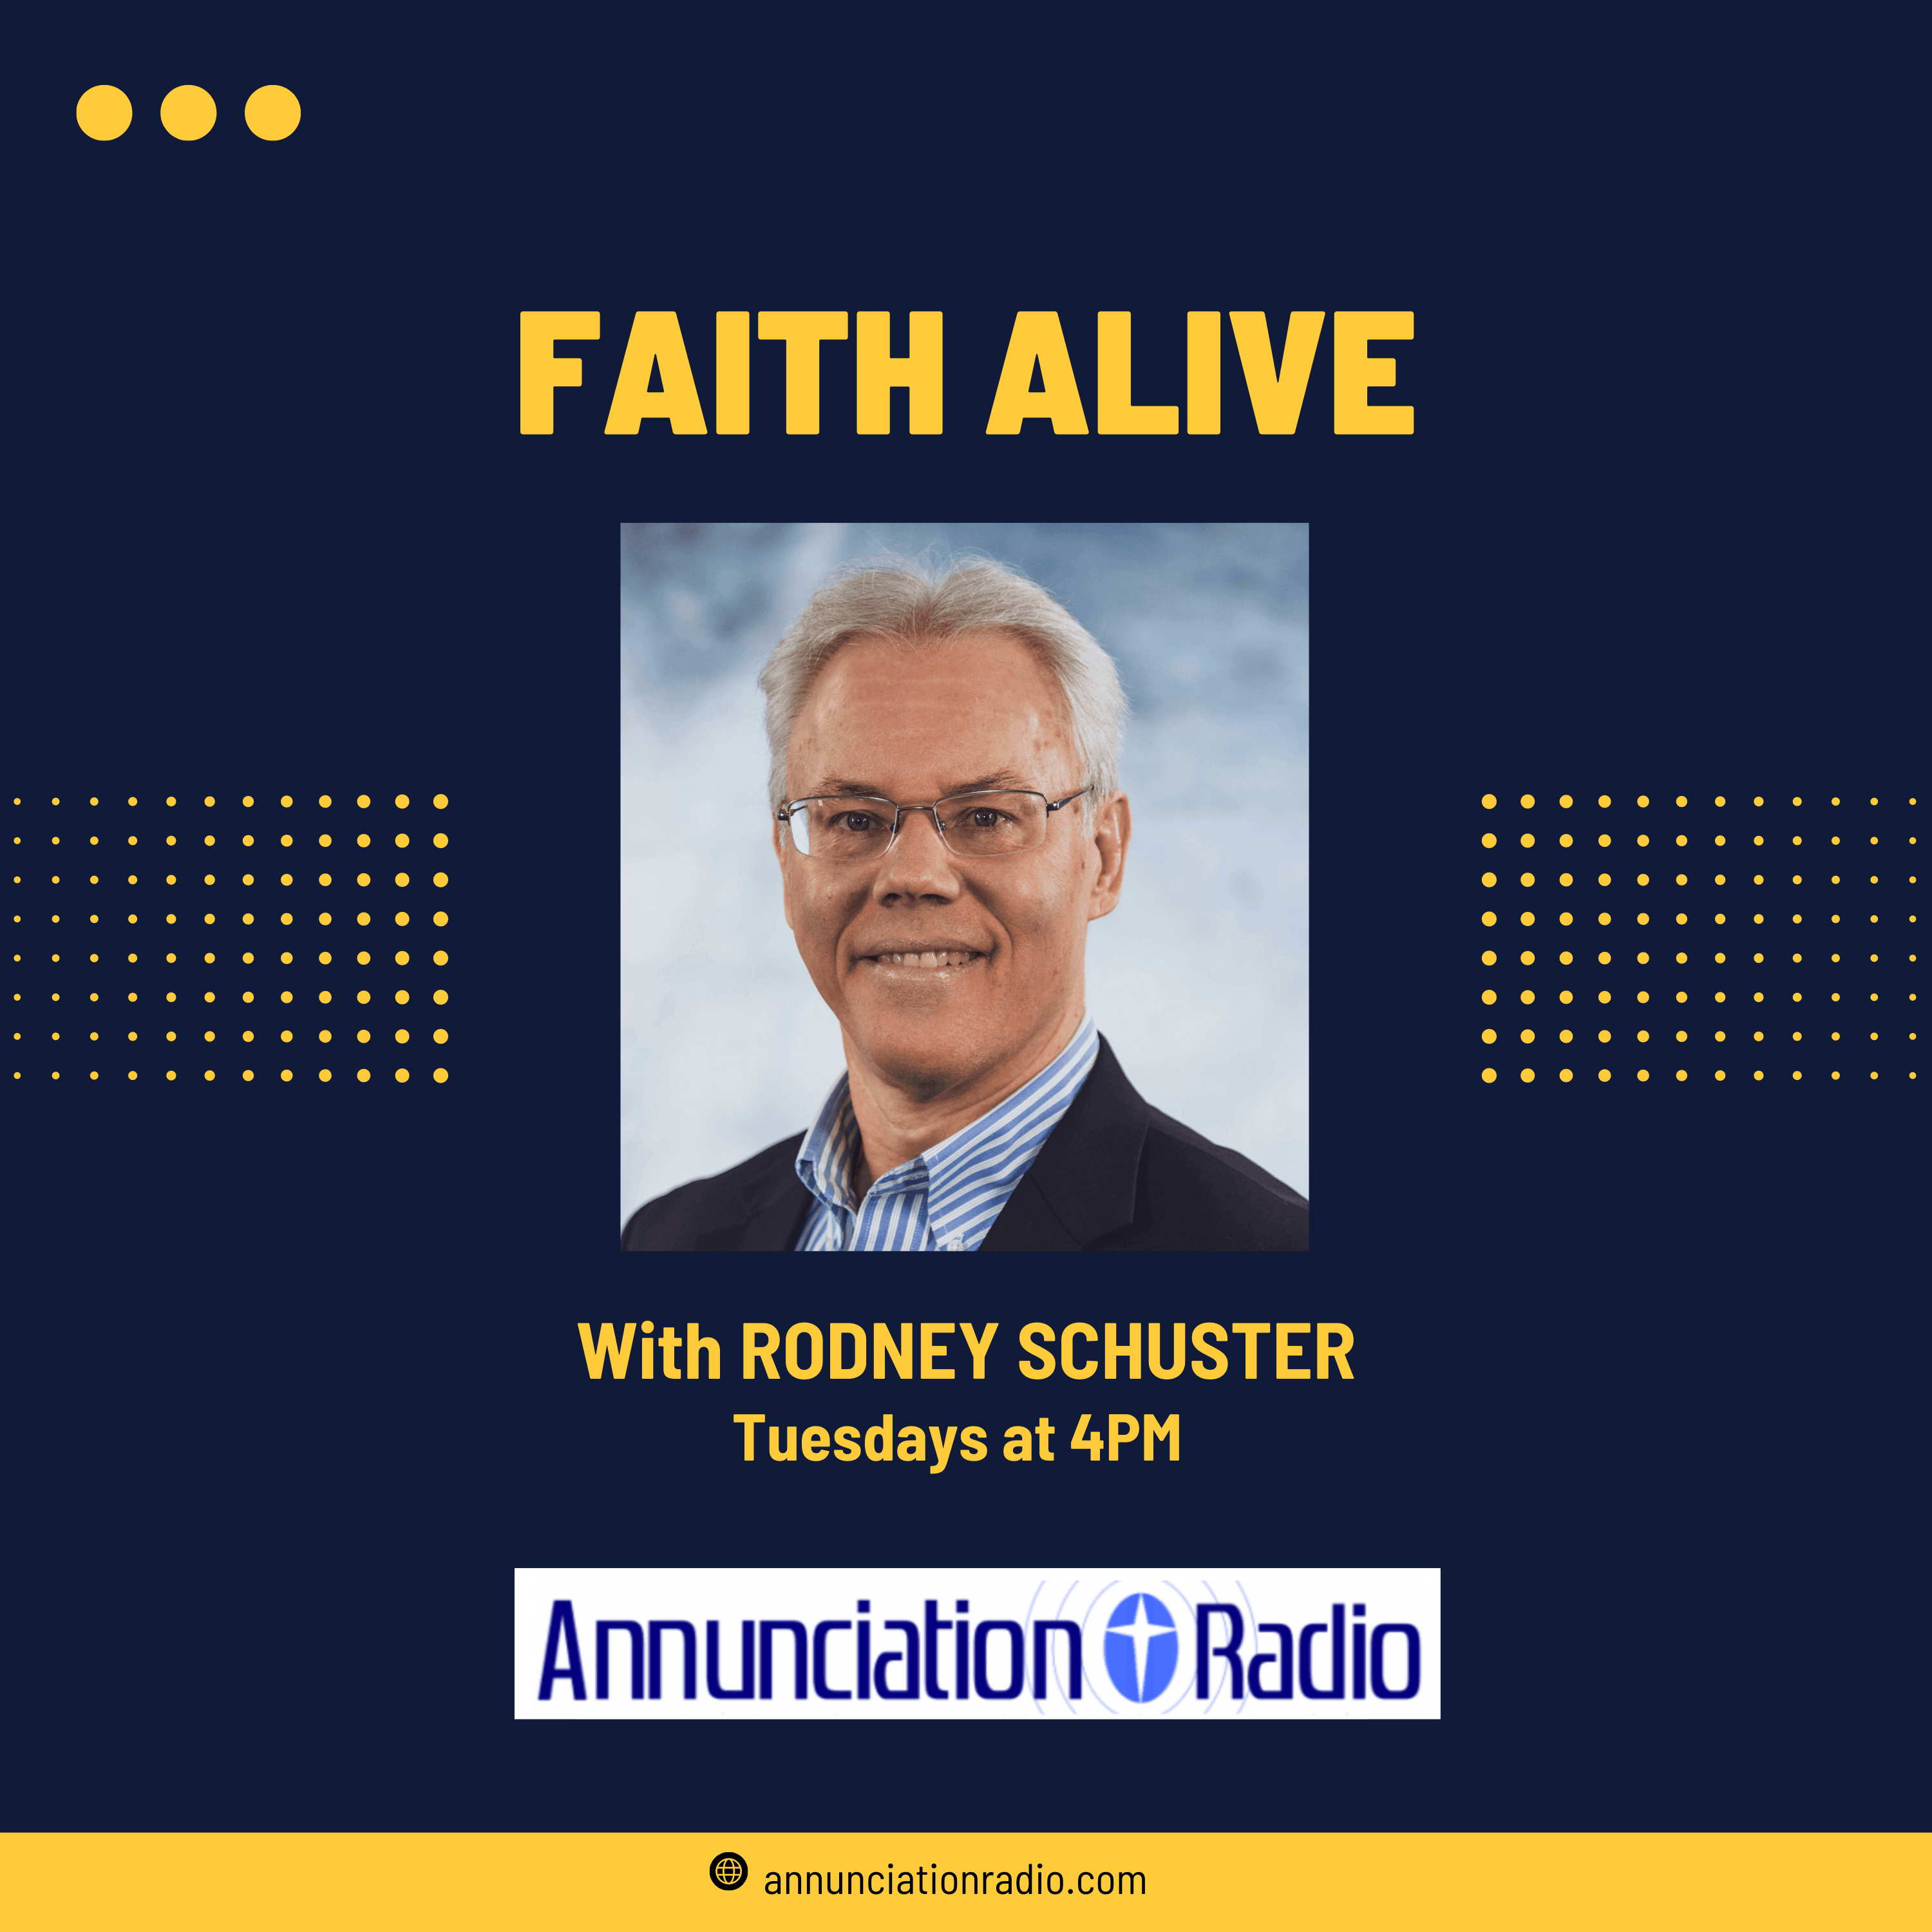 Catholic Counseling Focus of This Week's "Faith Alive" on Annunciation Radio